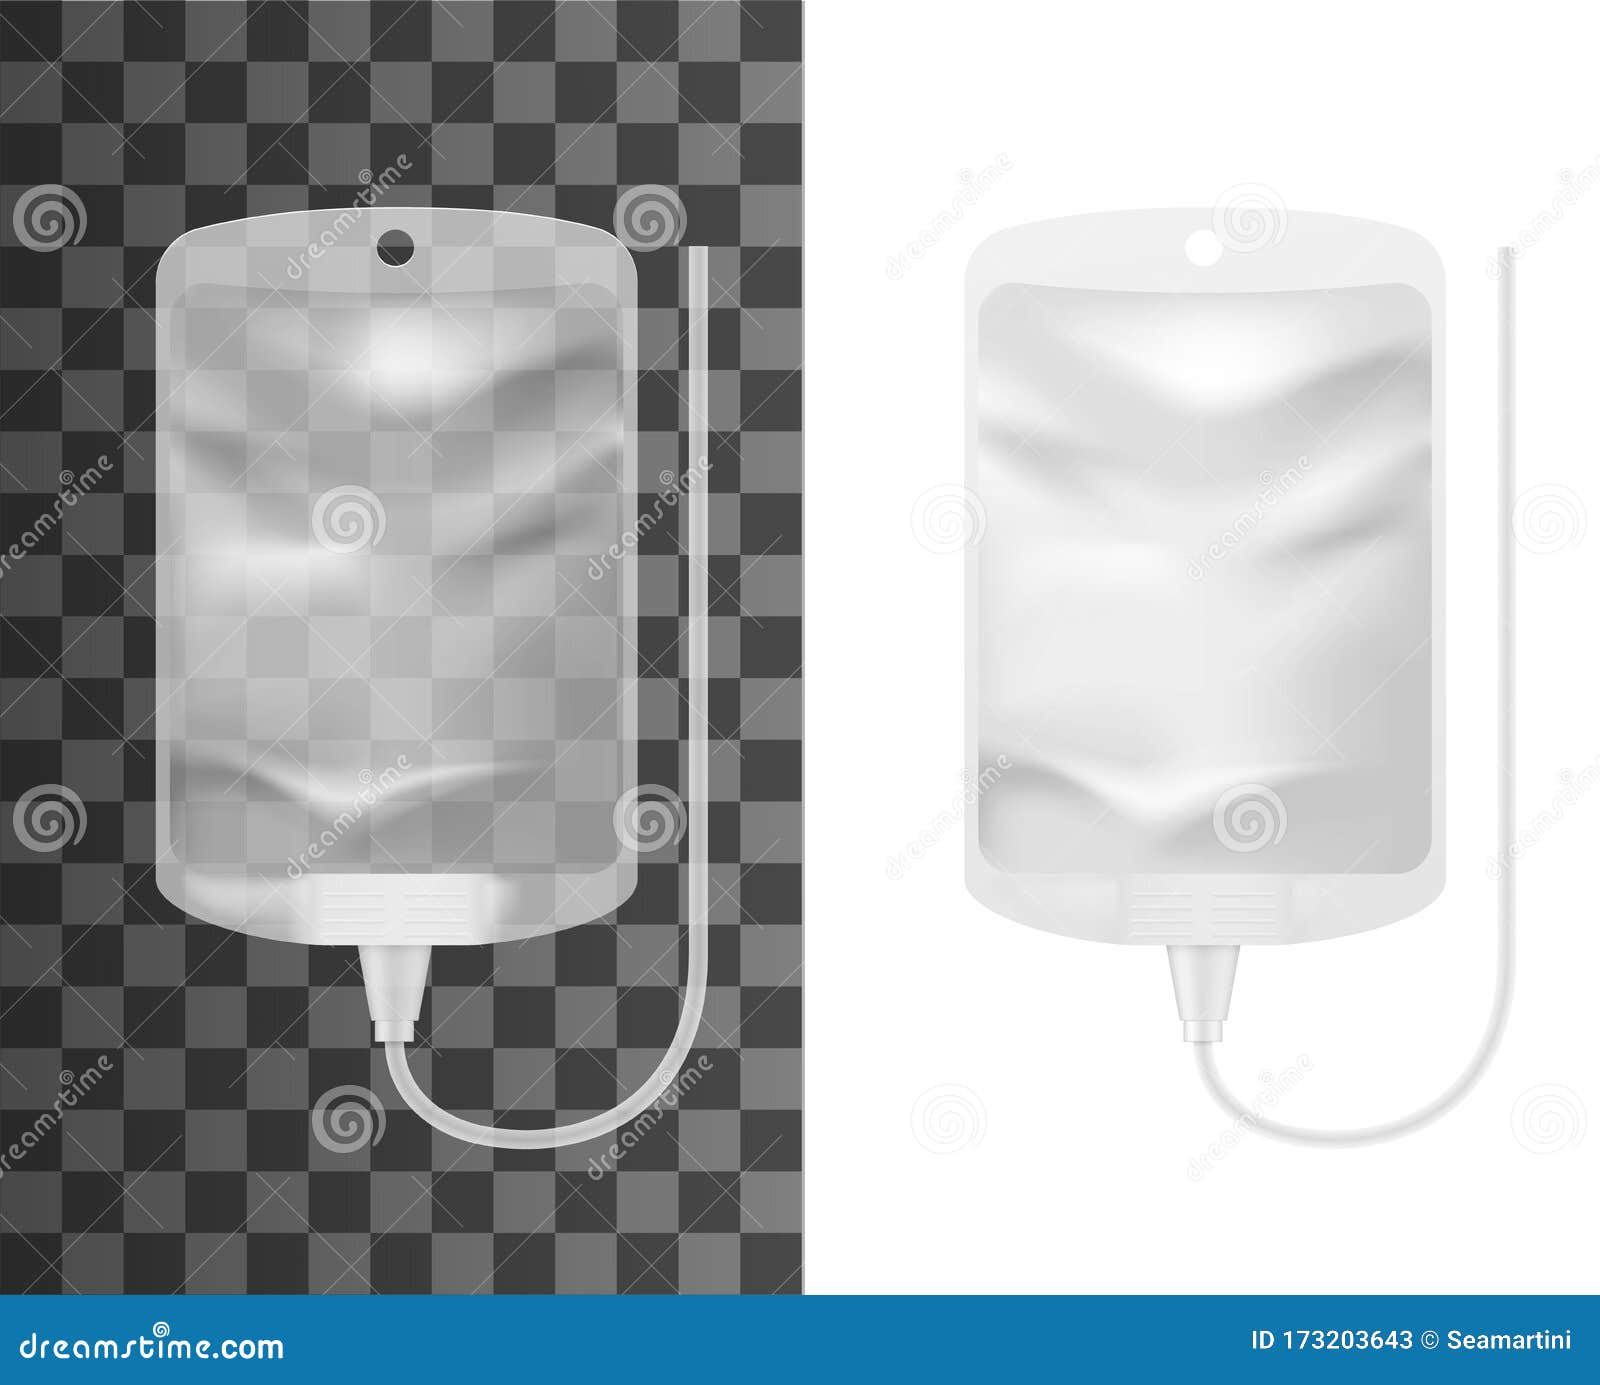 Download Intravenous IV Bag With Infusion Drip 3d Mockups Stock ...